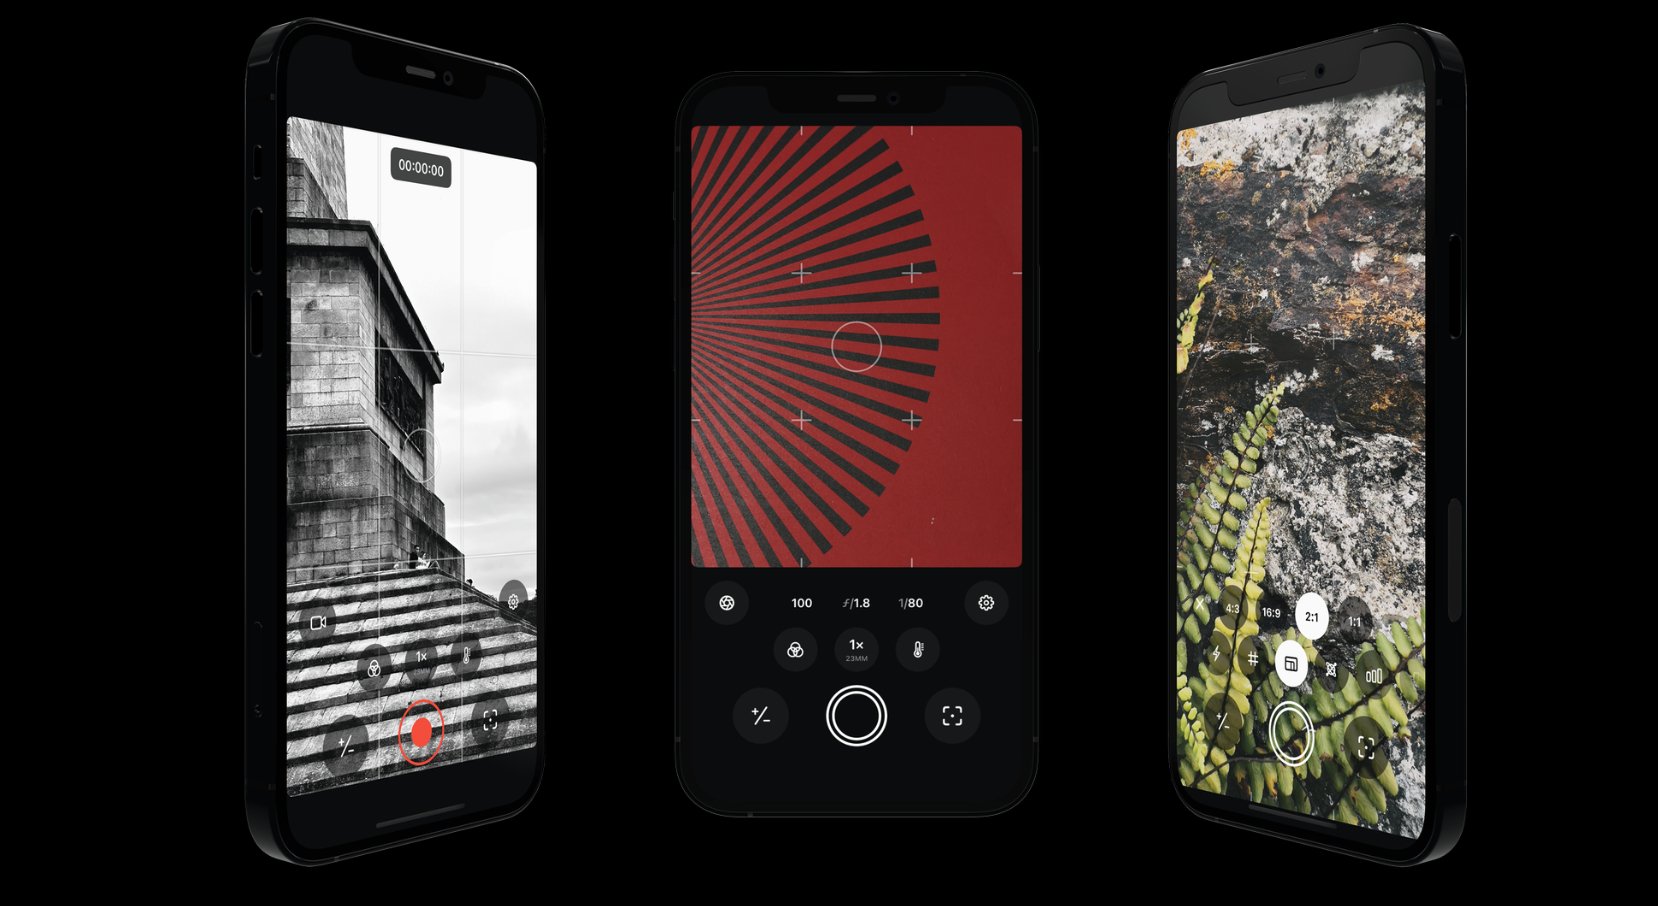 Pro Camera App Obscura 3 Arrives With Five Capture Modes and More